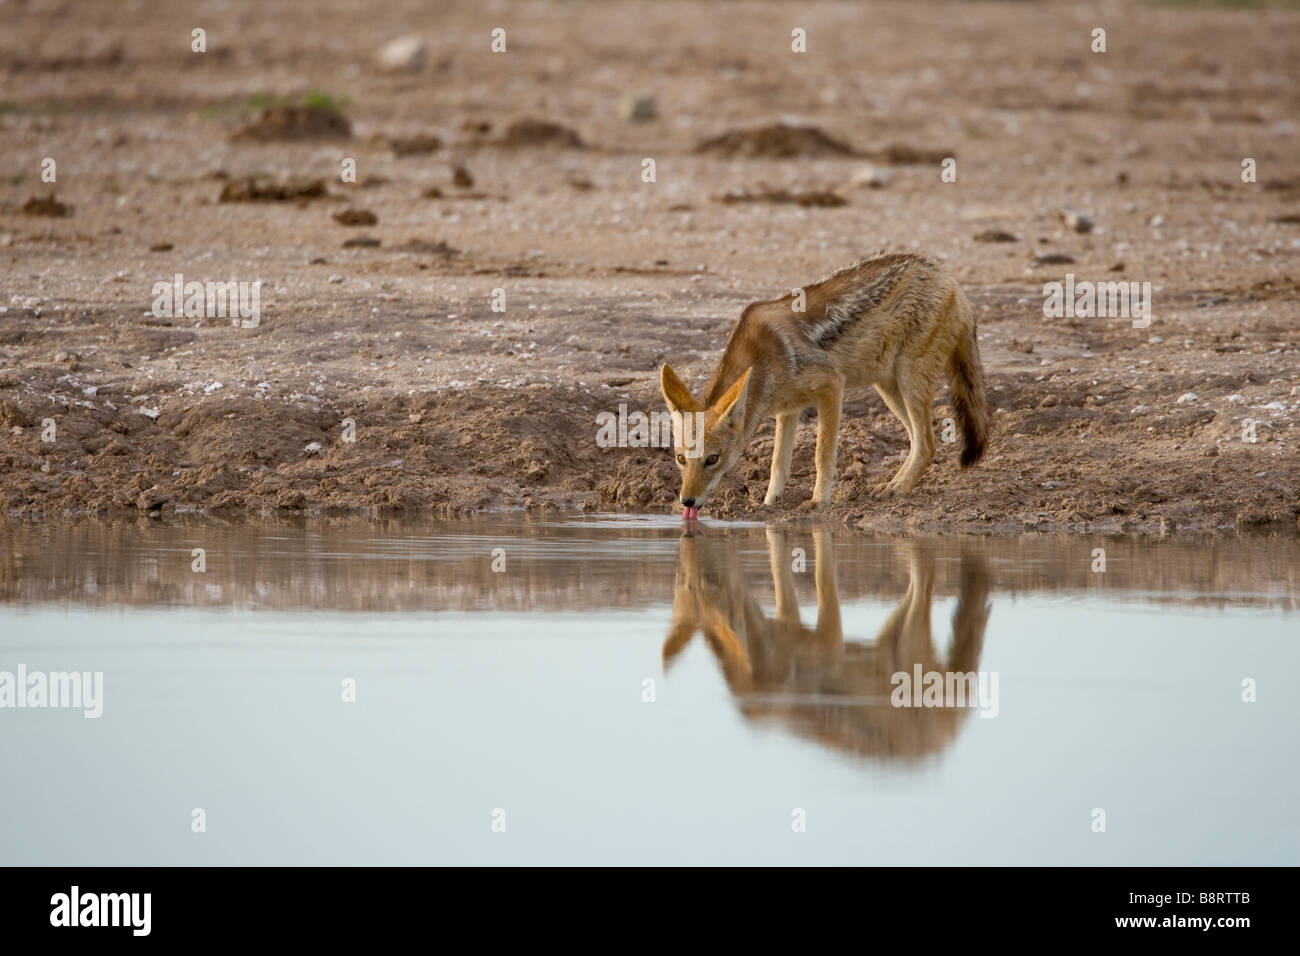 Africa Botswana Nxai Pan National Park Black Backed Jackal Canis mesomelas drinking from water hole at dawn Stock Photo